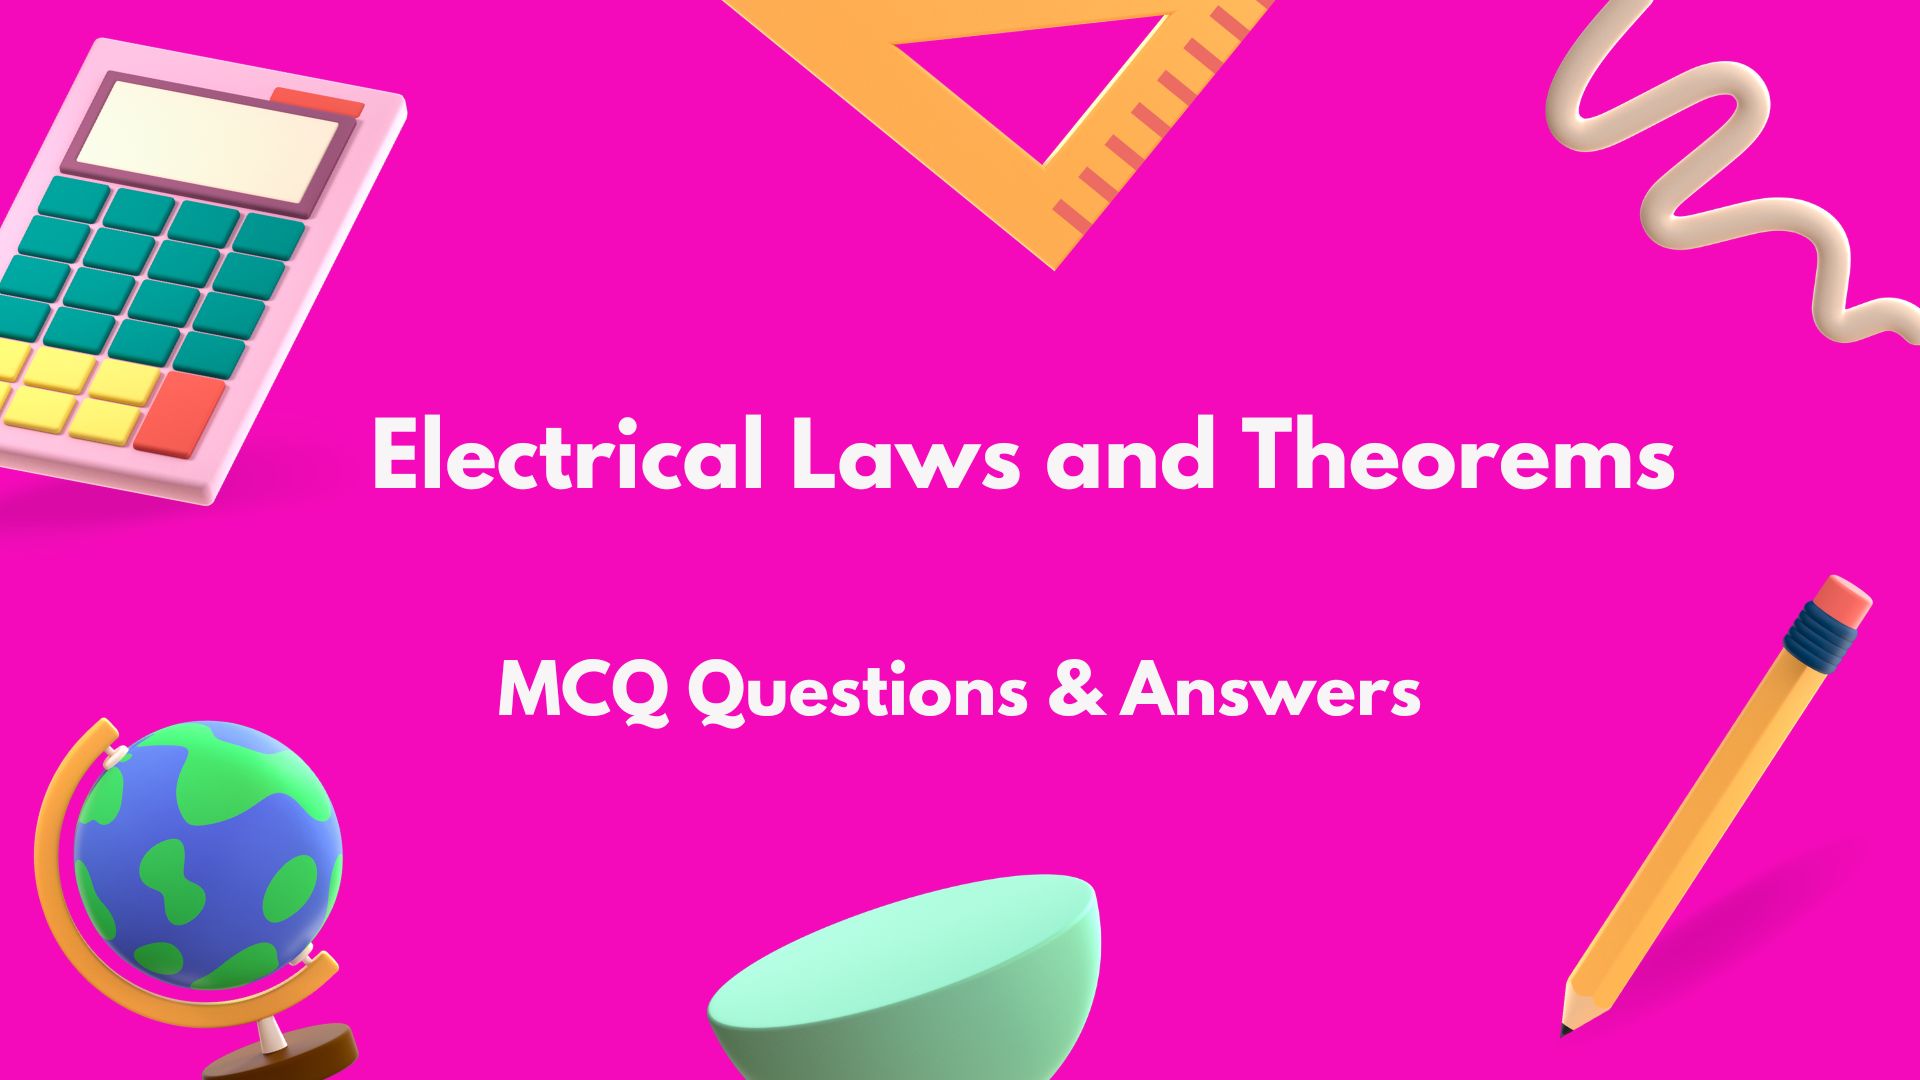 Basic Electrical Laws and Theorems MCQ Questions and Answers